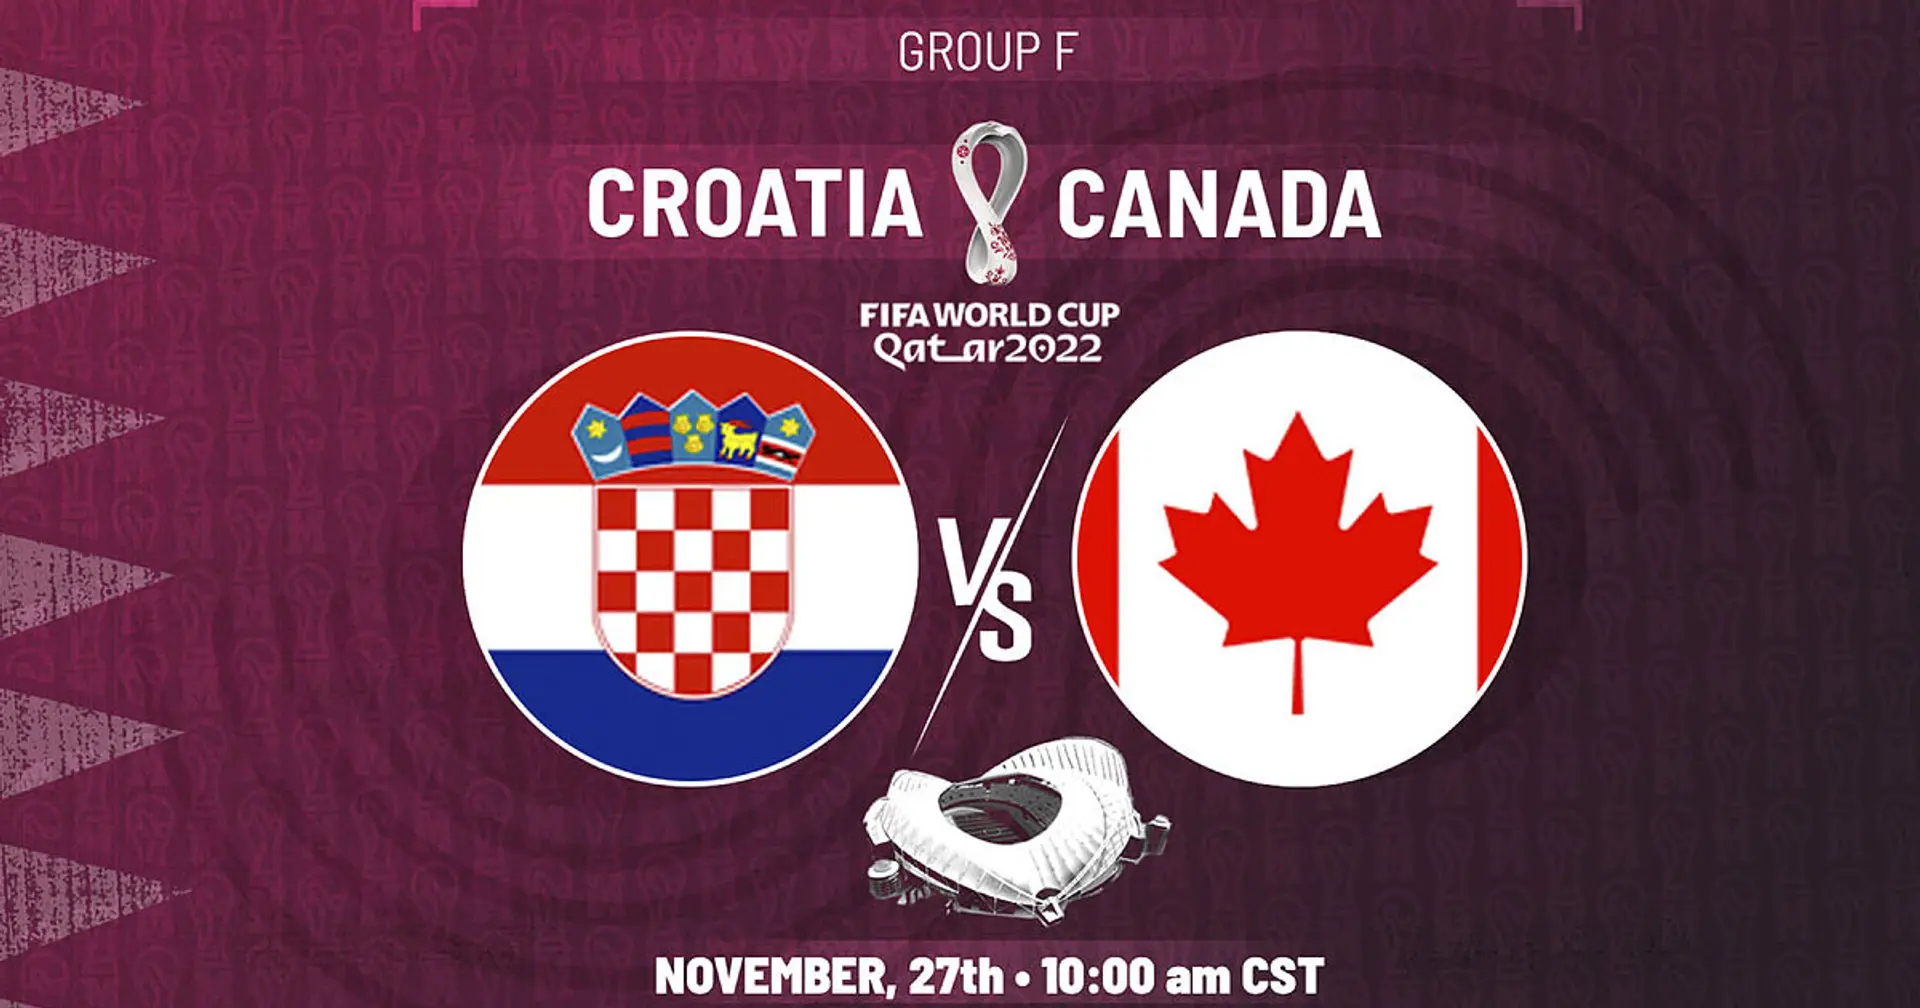 Croatia vs Canada: Official team lineups for the World Cup clash revealed